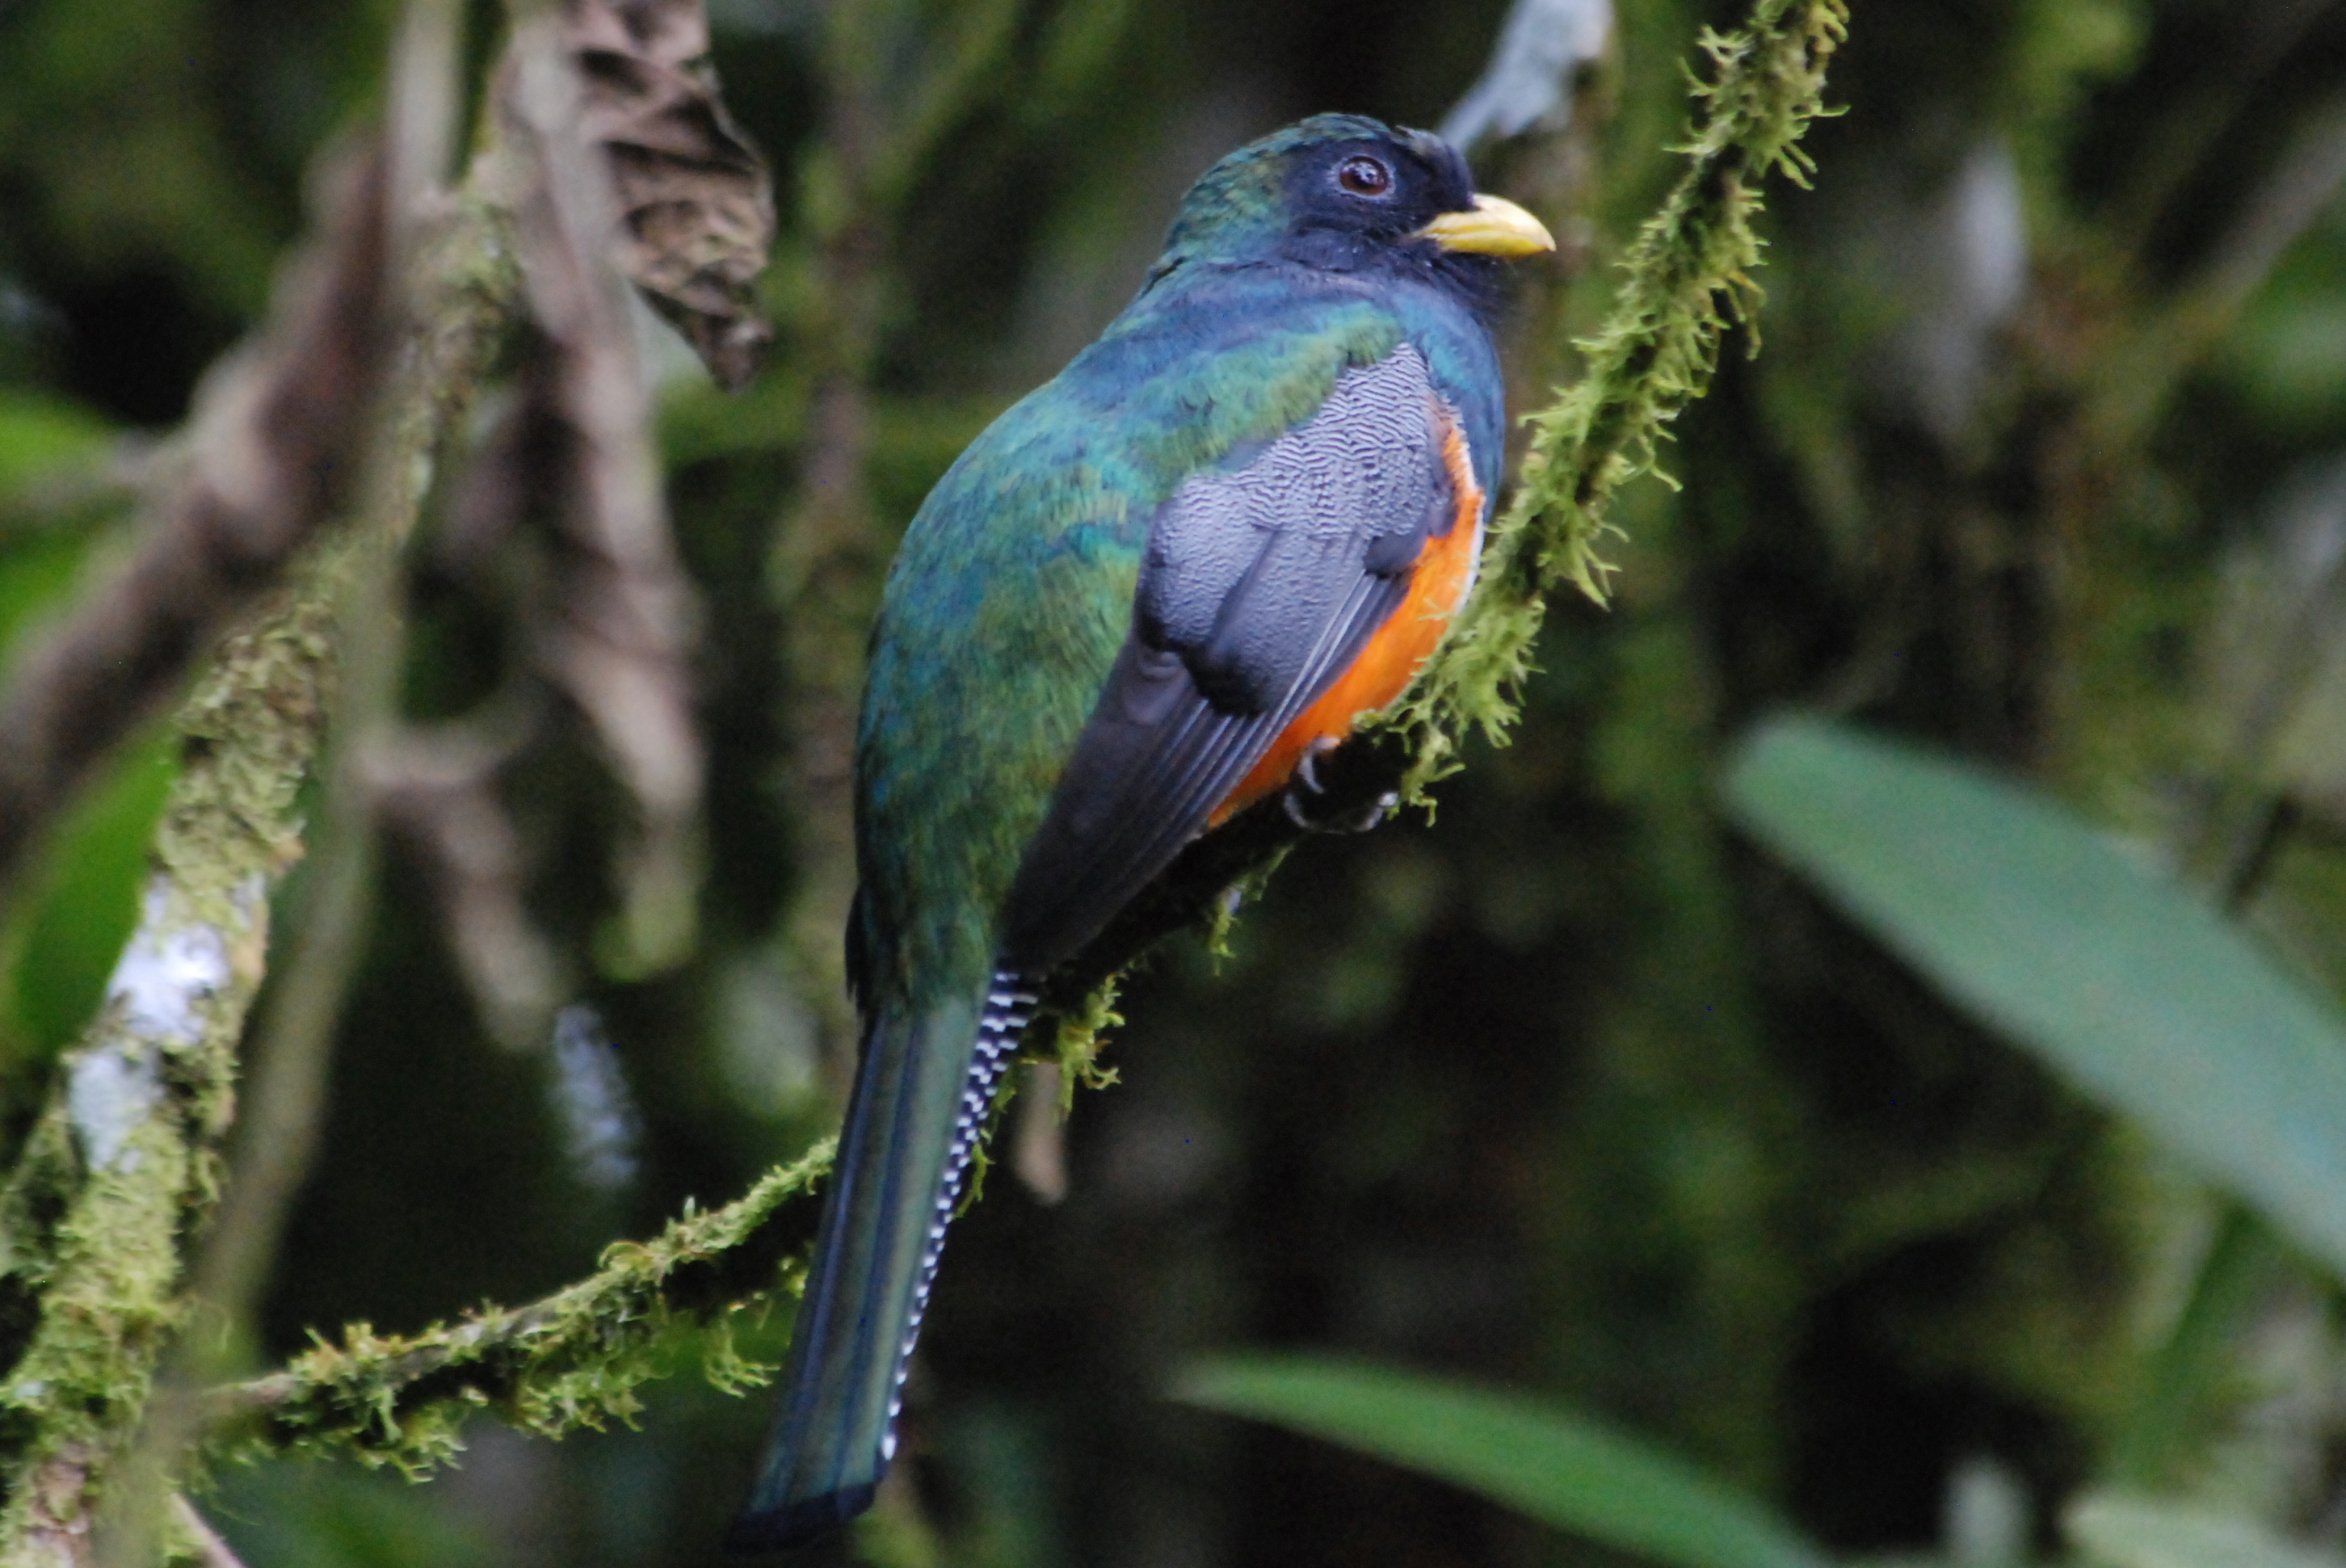 Click picture to see more Orange-bellied Trogons.